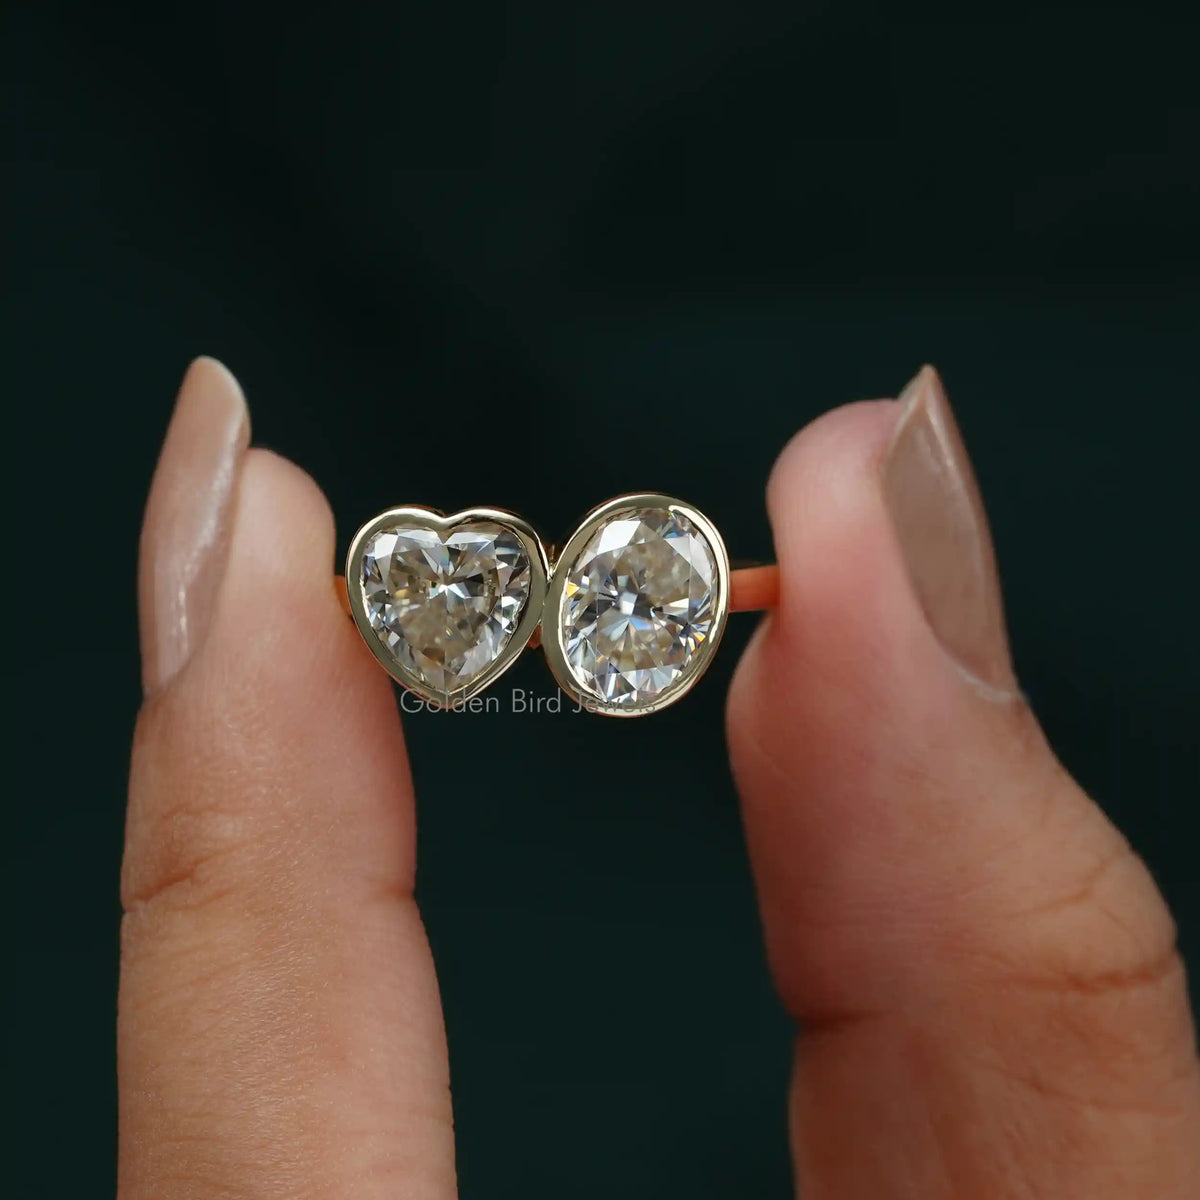 [Moissanite Oval And Heart Cut 2 Stone Ring In 18k Yellow Gold]-[Golden Bird Jewels]